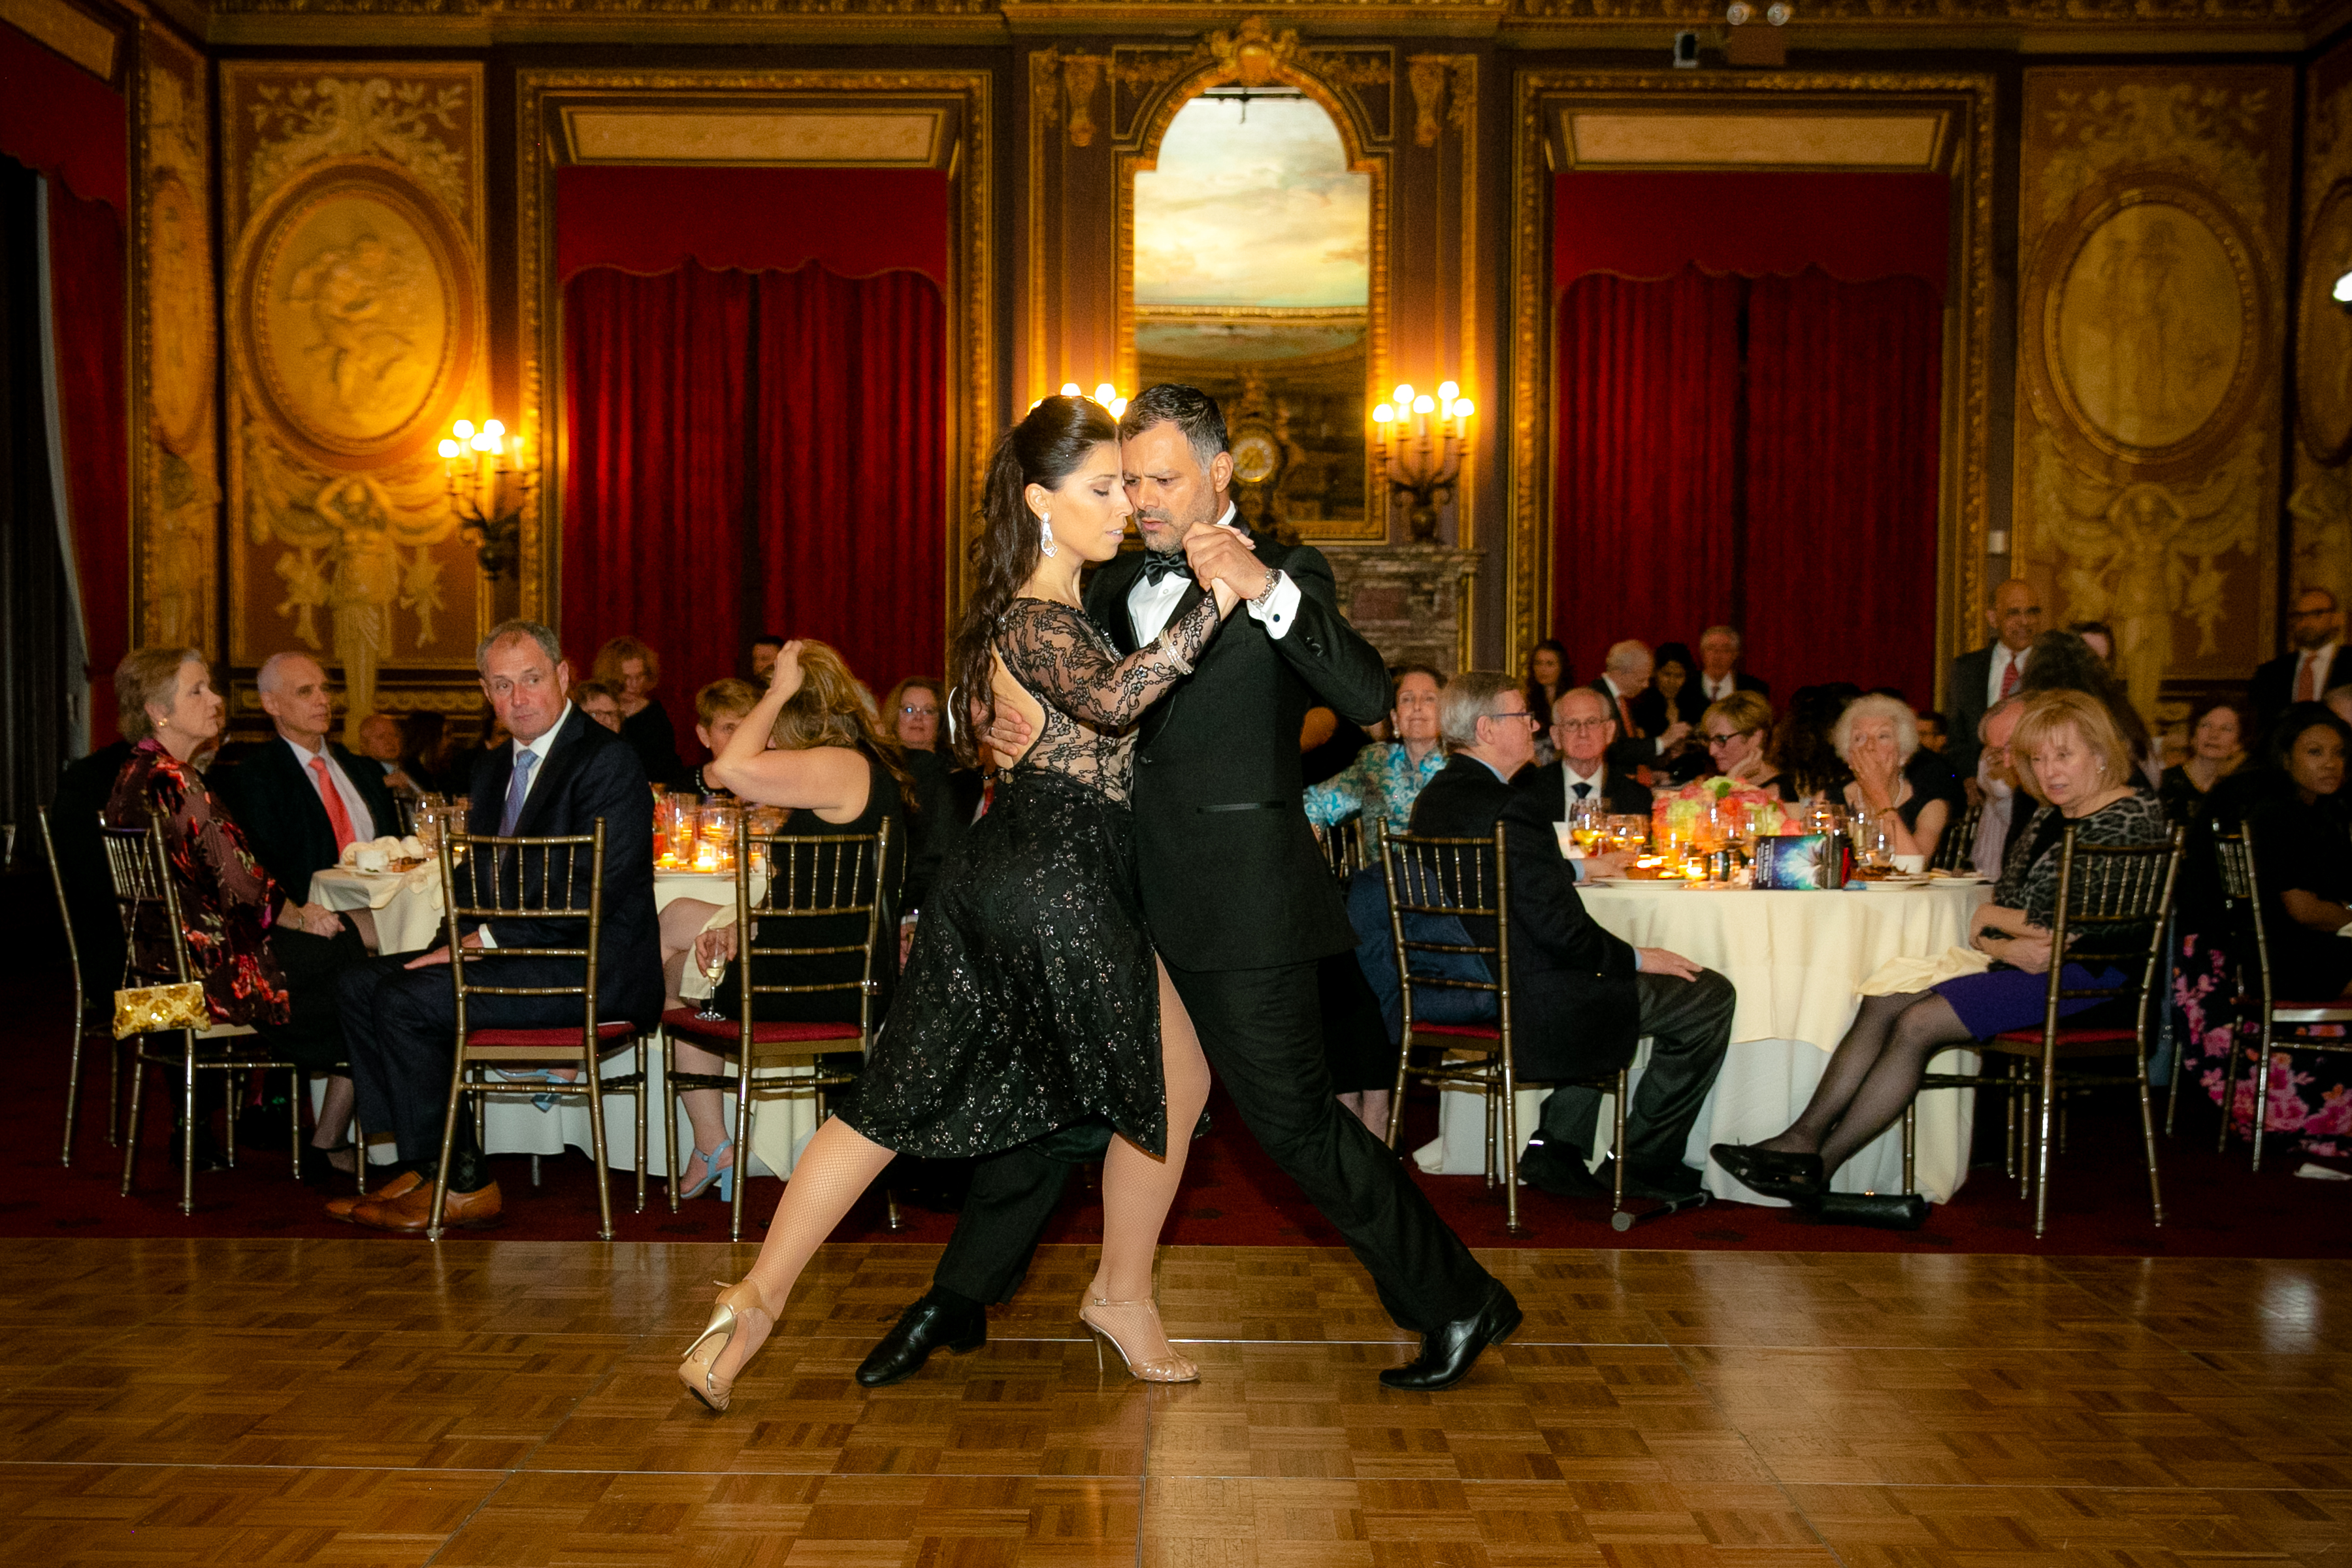 A man and a woman dance together while seated guests watch behind them